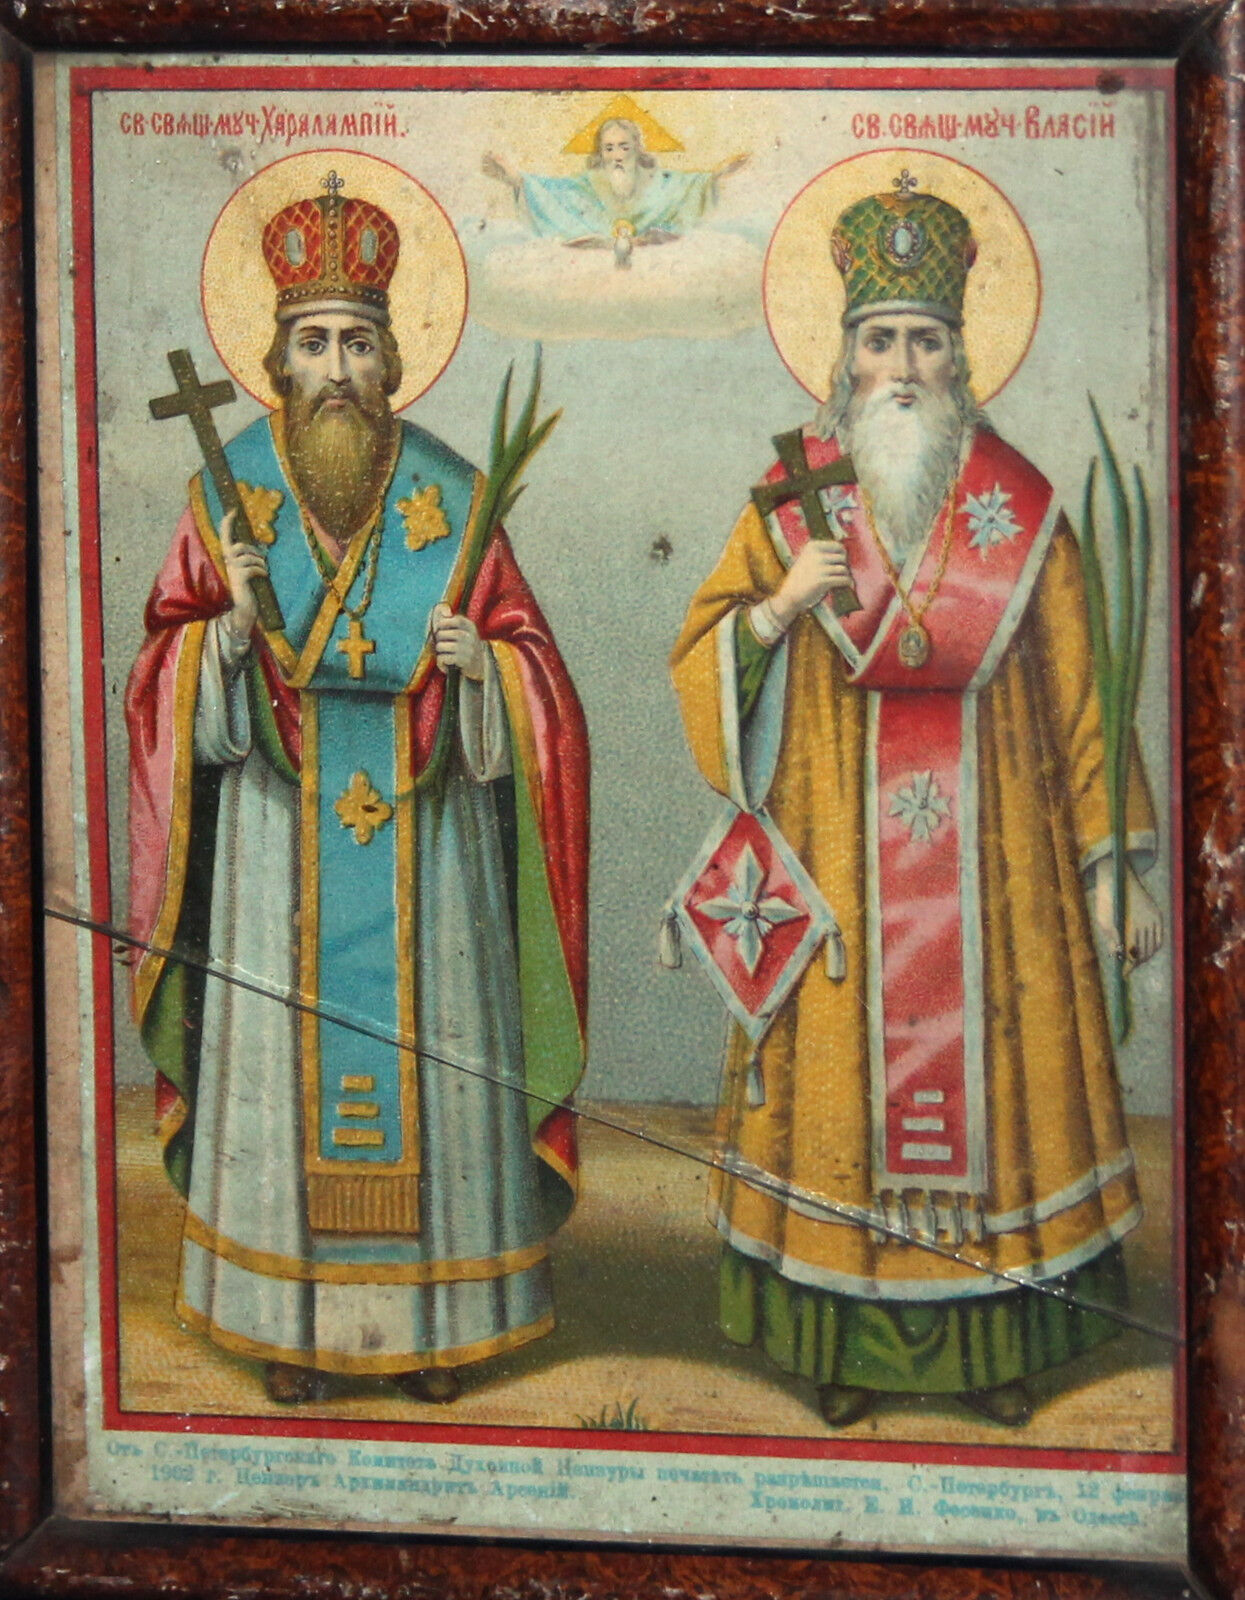 1902 ANTIQUE RUSSIAN ORTHODOX PRINT SAINTS CHARALAMBOS AND BLAISE